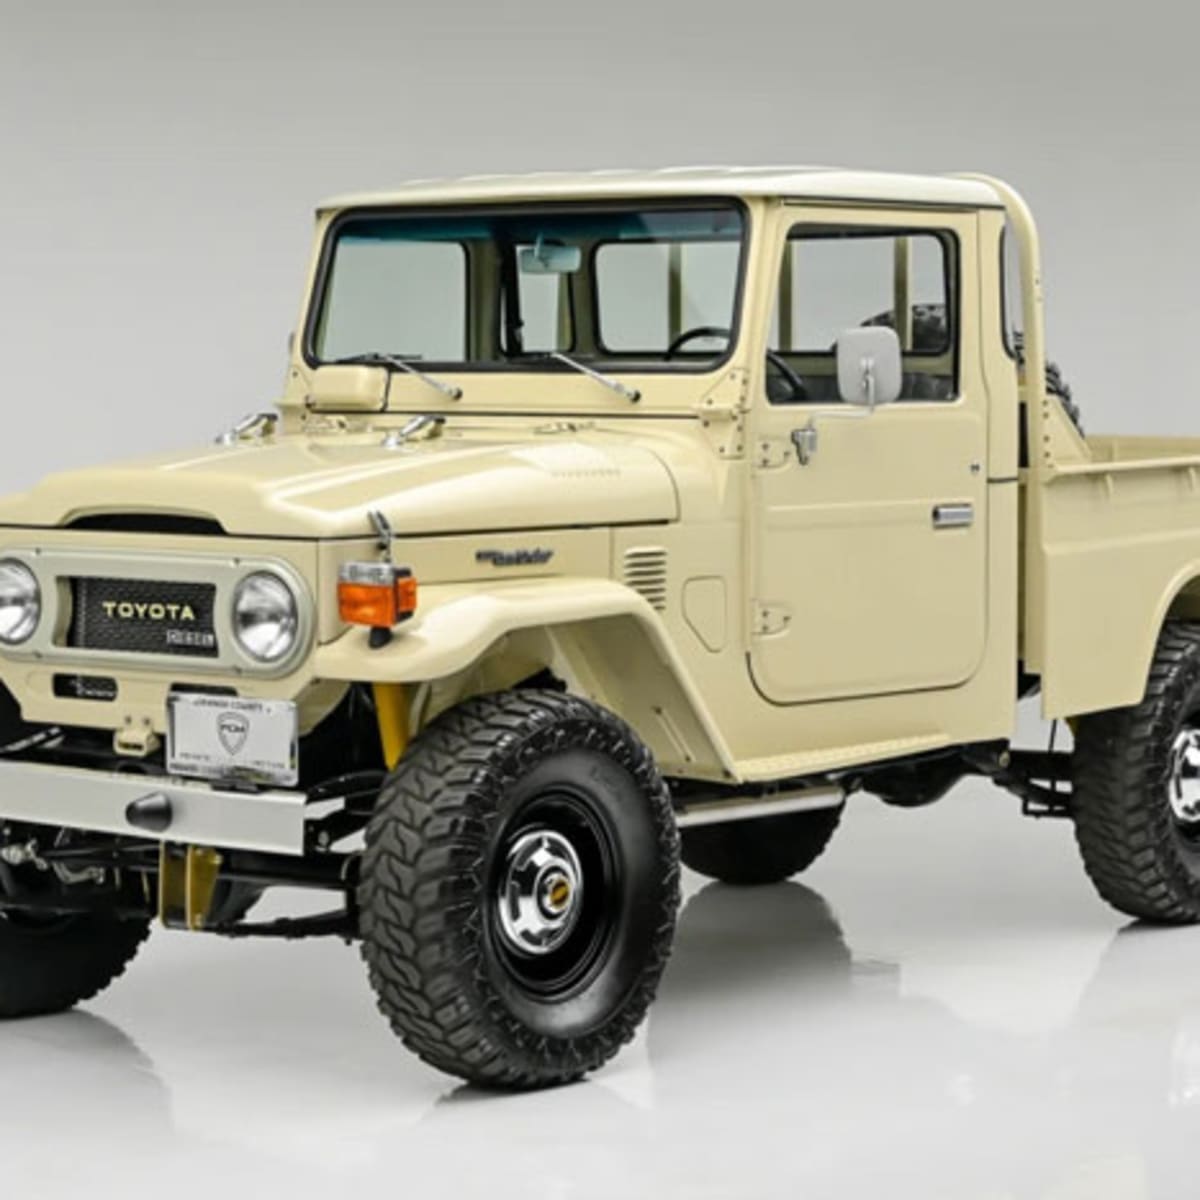 Old Cars We'd Buy That: 1979 Toyota Land Cruiser HJ45 Pickup - Old Cars  Weekly